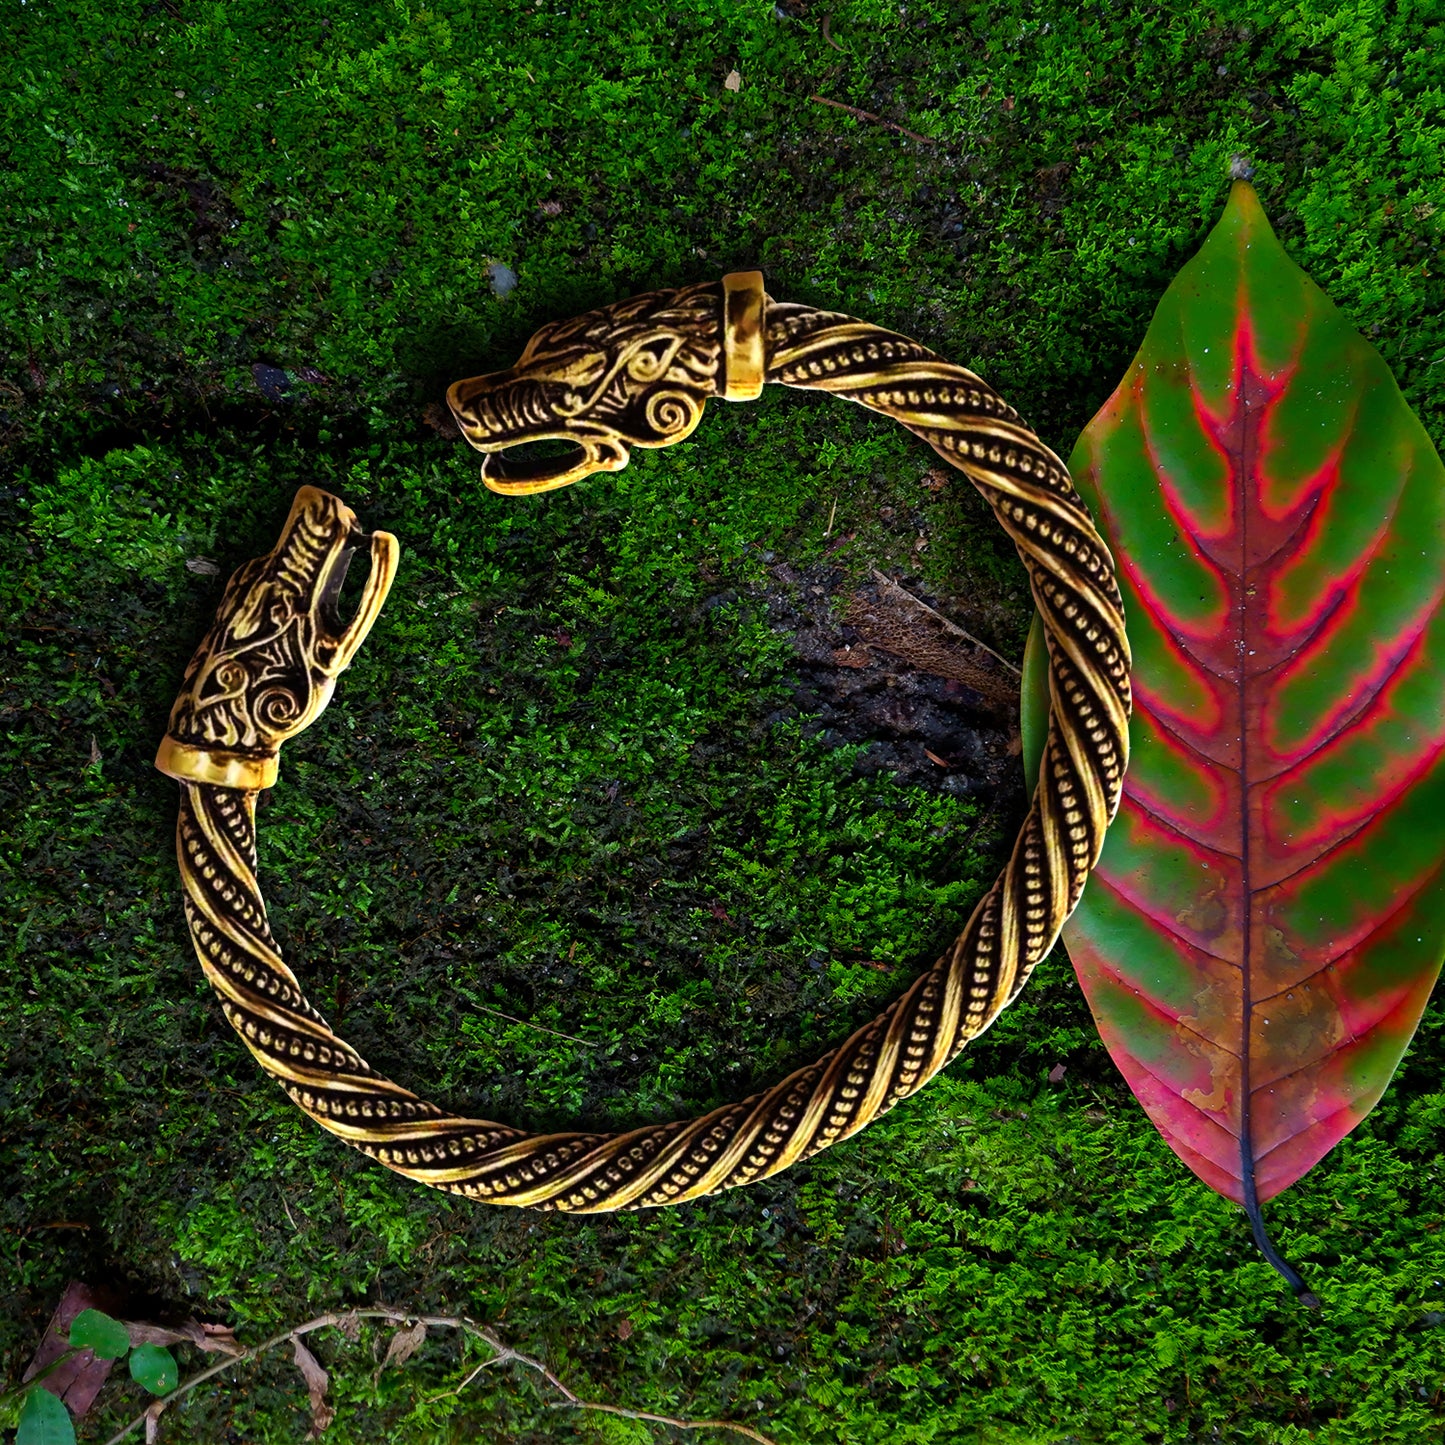 Close up view of a gold bracelet against a grassy background. Both ends of the bracelet have dragon heads on them, facing each other. The bracelet's main section has a spiraling line and dot pattern. Next to the bracelet is a green leaf with a red center.